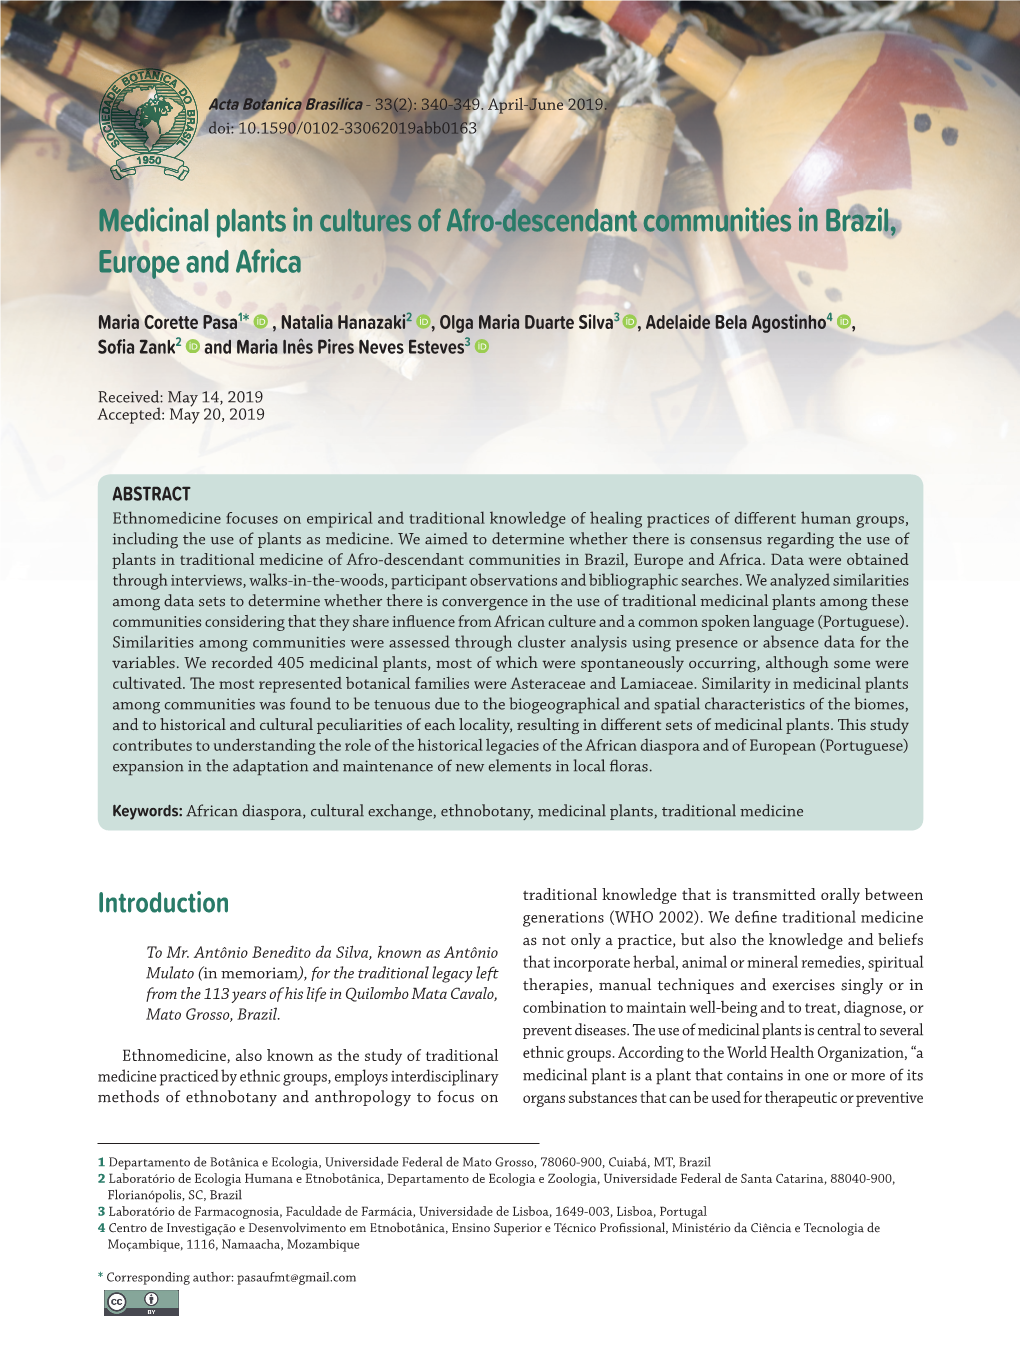 Medicinal Plants in Cultures of Afro-Descendant Communities in Brazil, Europe and Africa